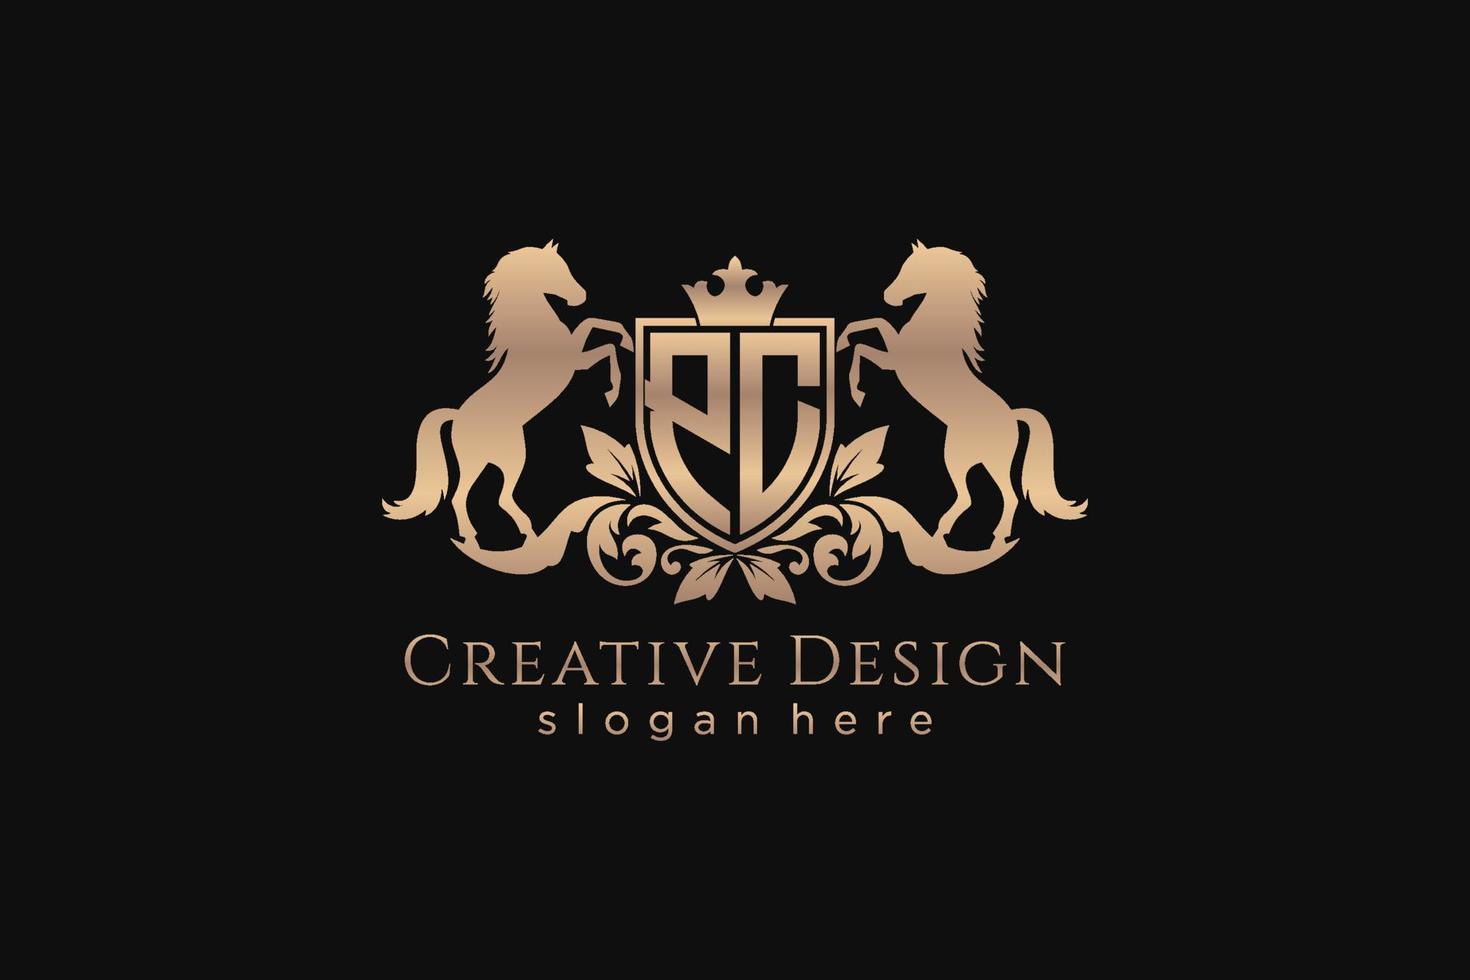 initial PC Retro golden crest with shield and two horses, badge template with scrolls and royal crown - perfect for luxurious branding projects vector